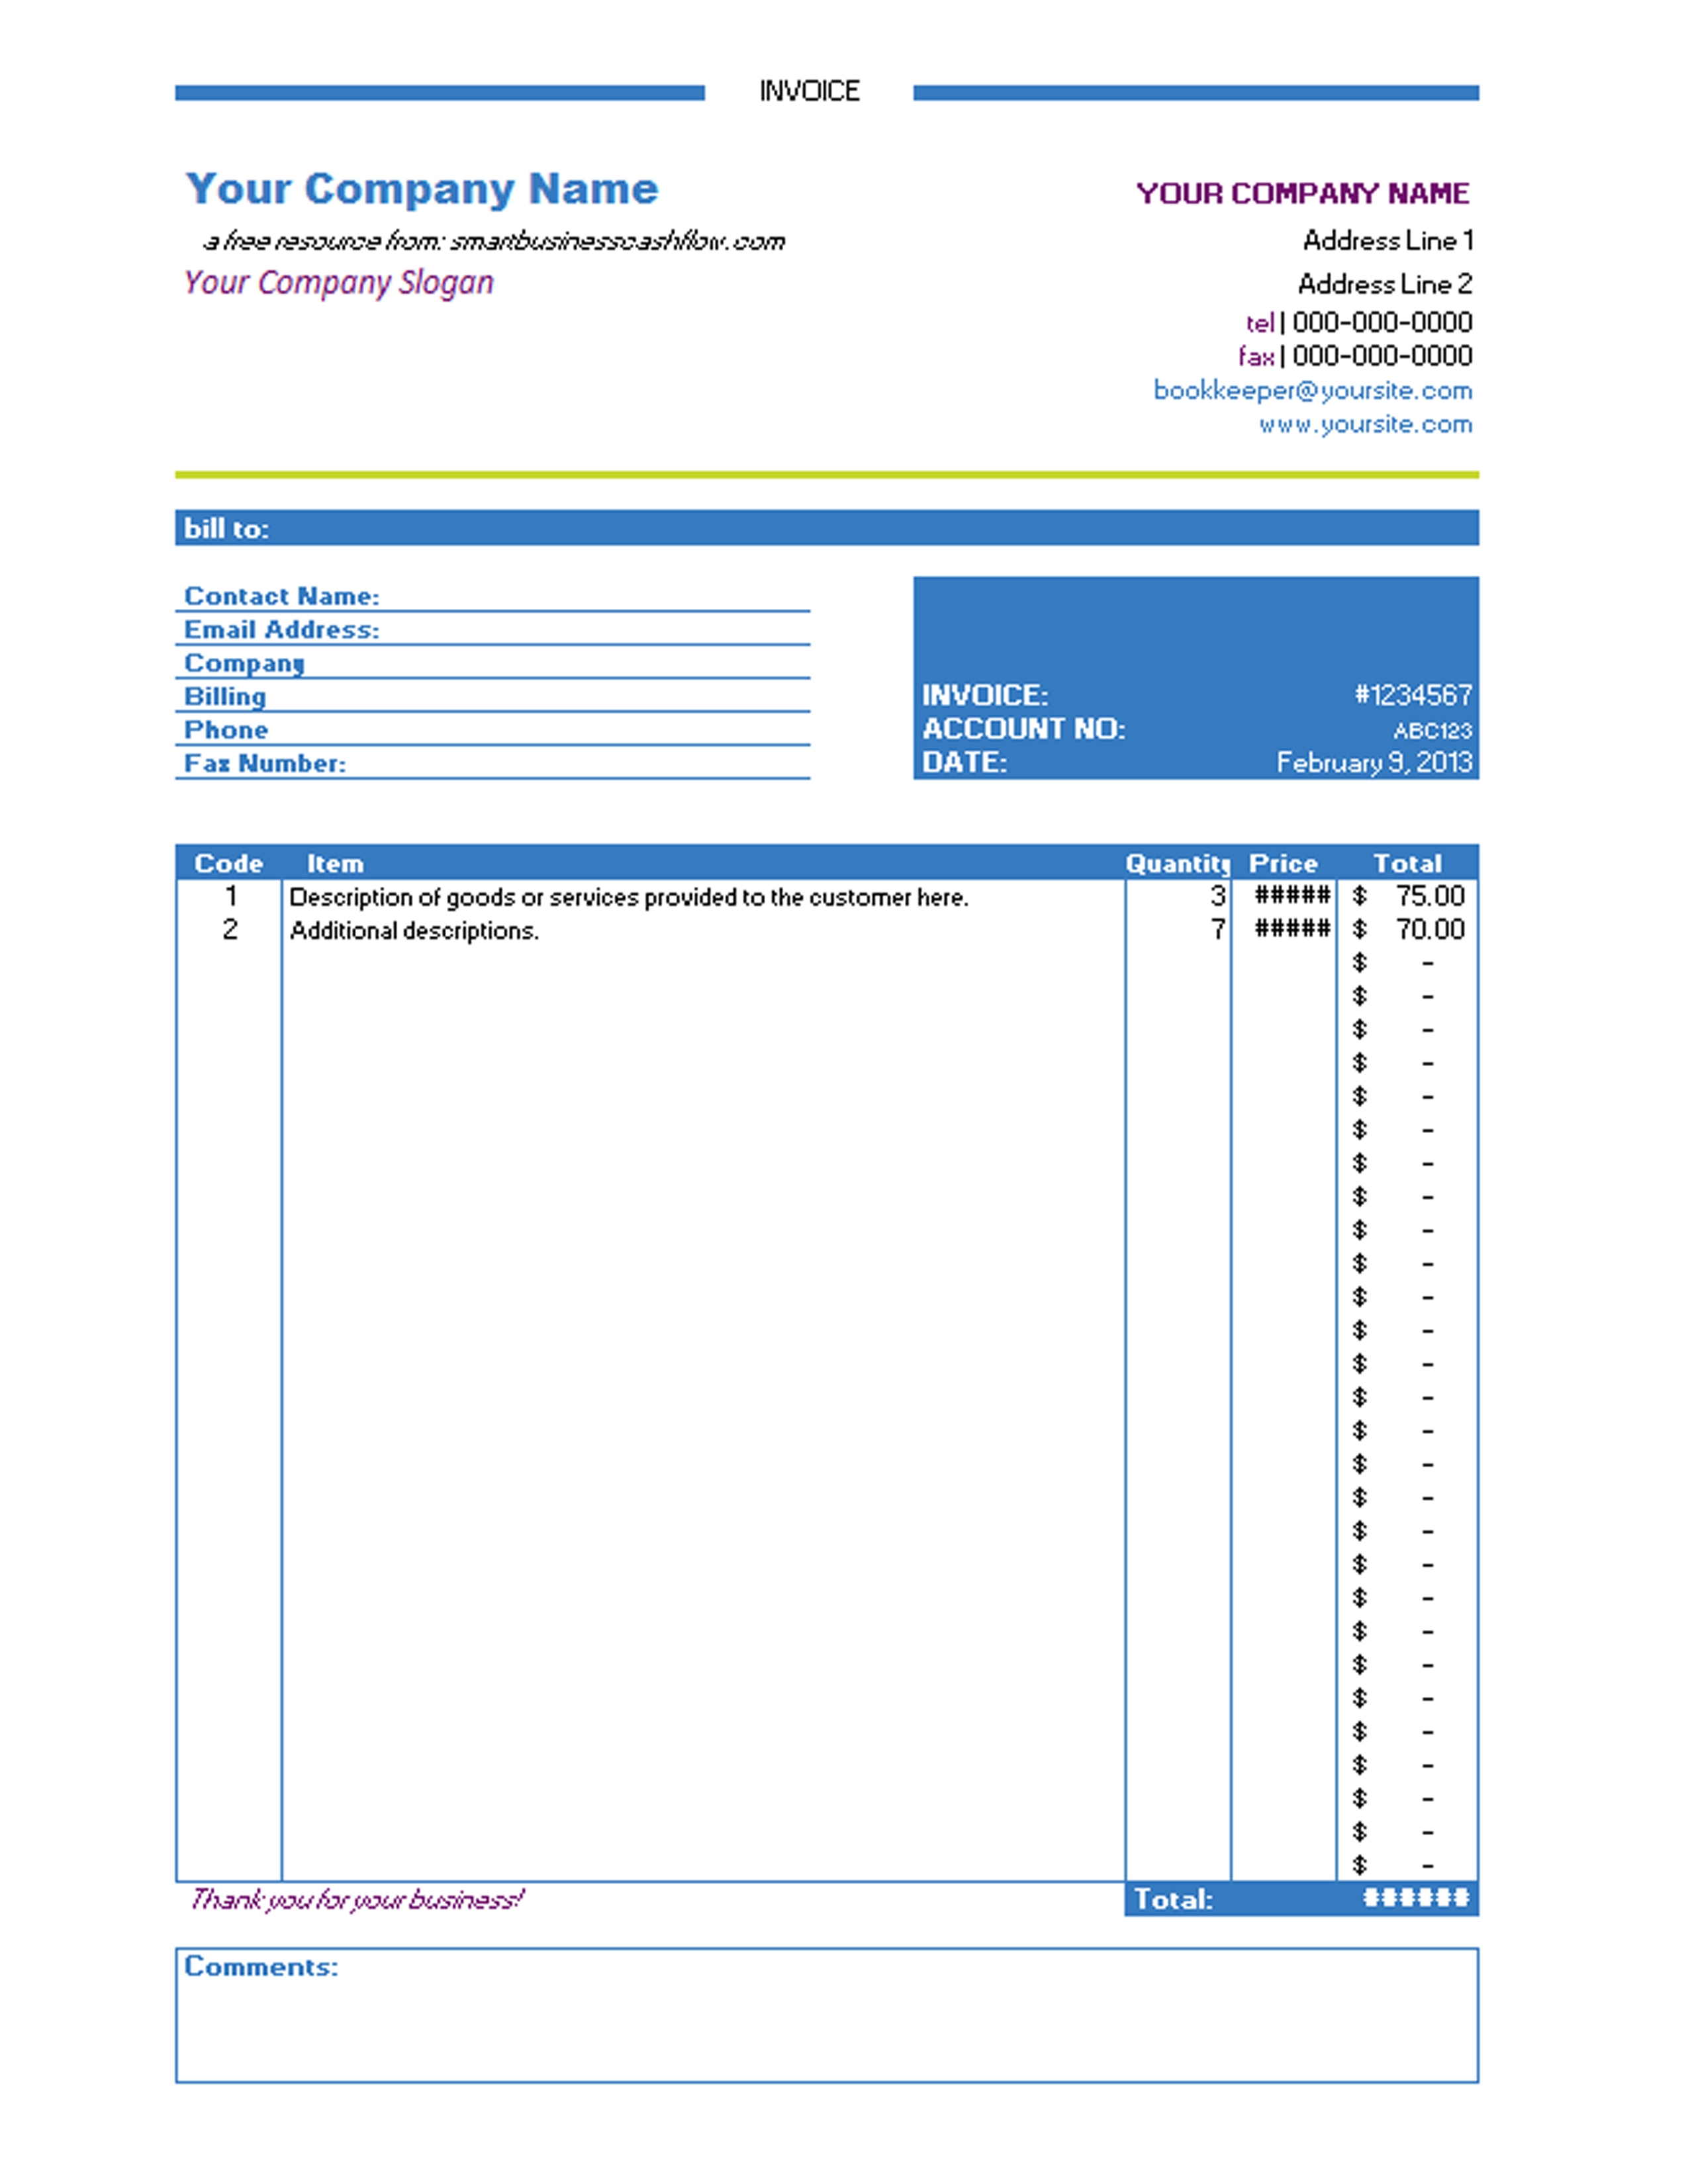 invoice template excel invoice sample template sales invoice excel invoice format